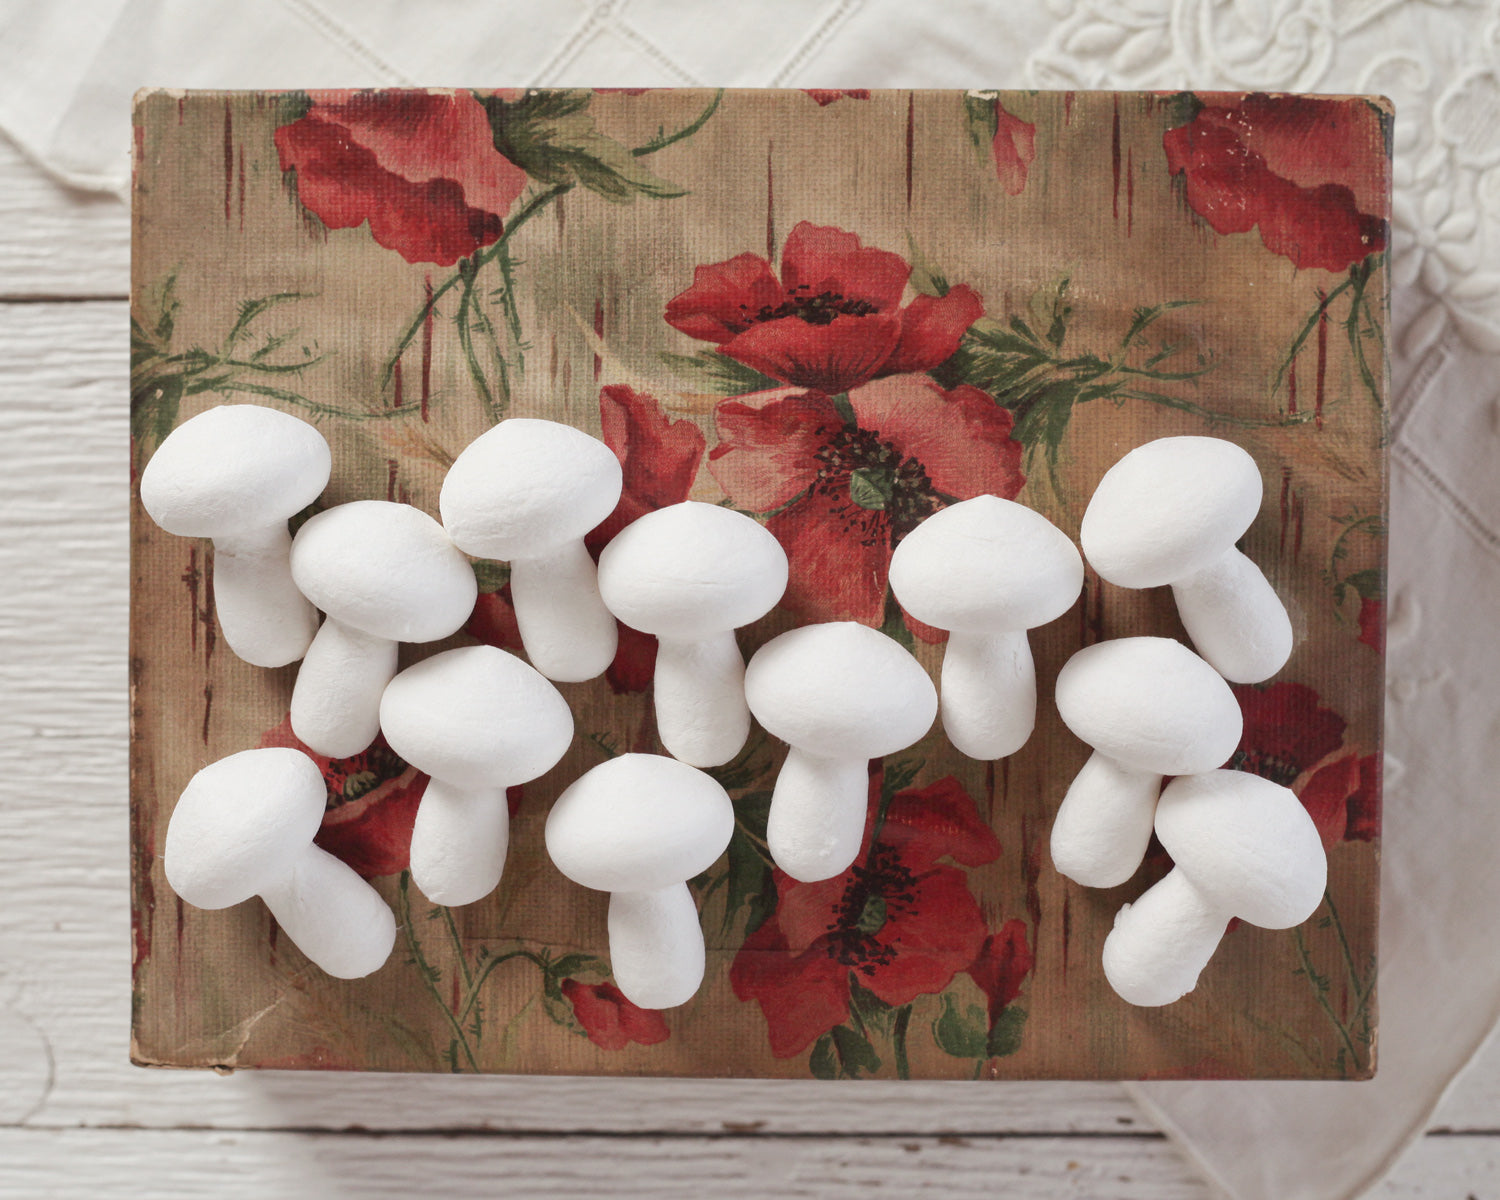 Unfinished spun cotton craft shapes to decorate.  These whimsical puffy mushrooms are made out of tightly spun cotton which can be painted, glittered, and embellished. They make great starters for vintage-style ornaments or decorations. Each mushroom has a small hole in the bottom of the stalk which can be used for mounting on wires or picks.